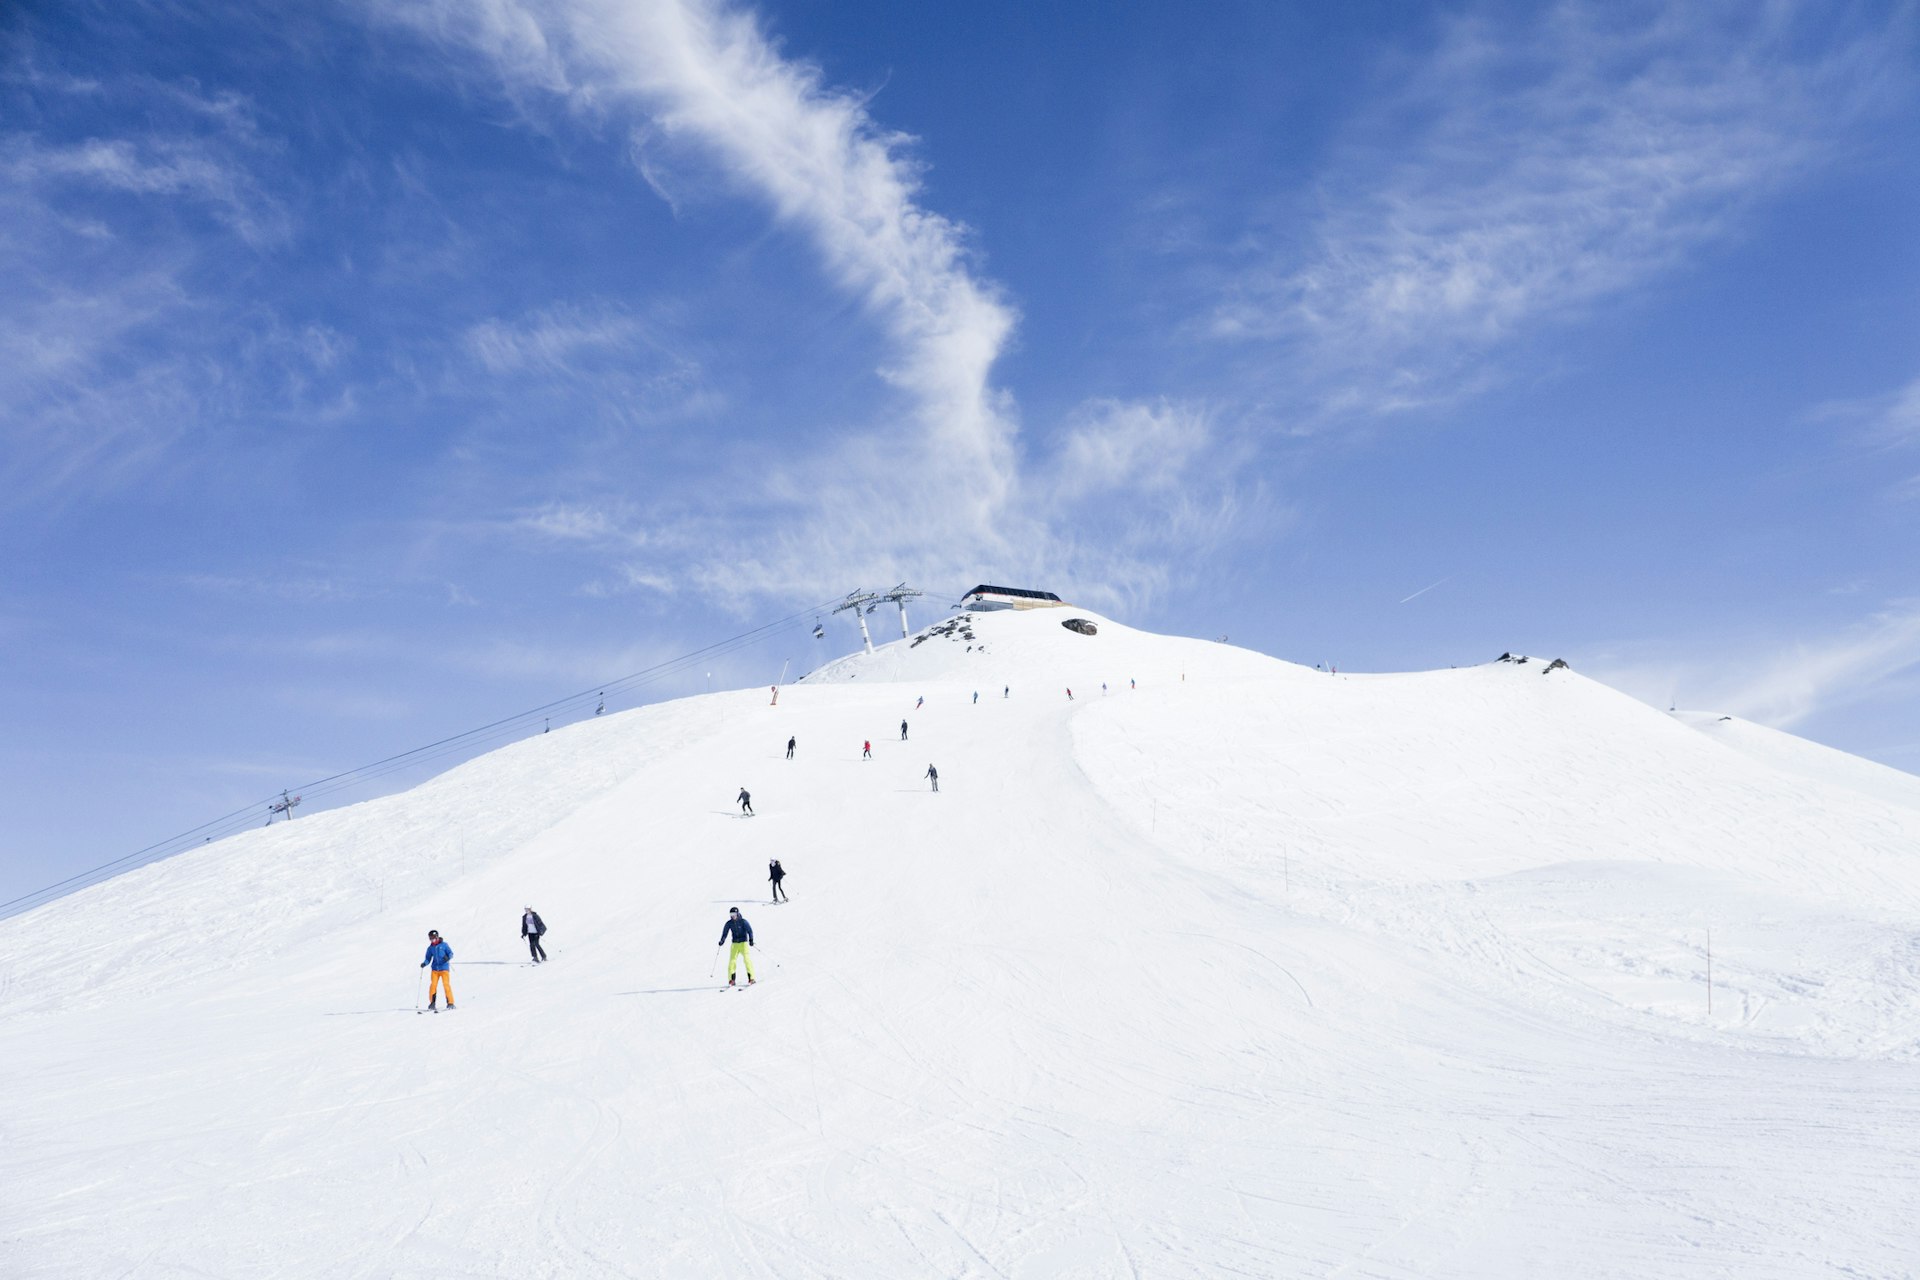 View from bottom of a ski hill of a bunch of skiers making their way down the hill, with a chair lift in the background